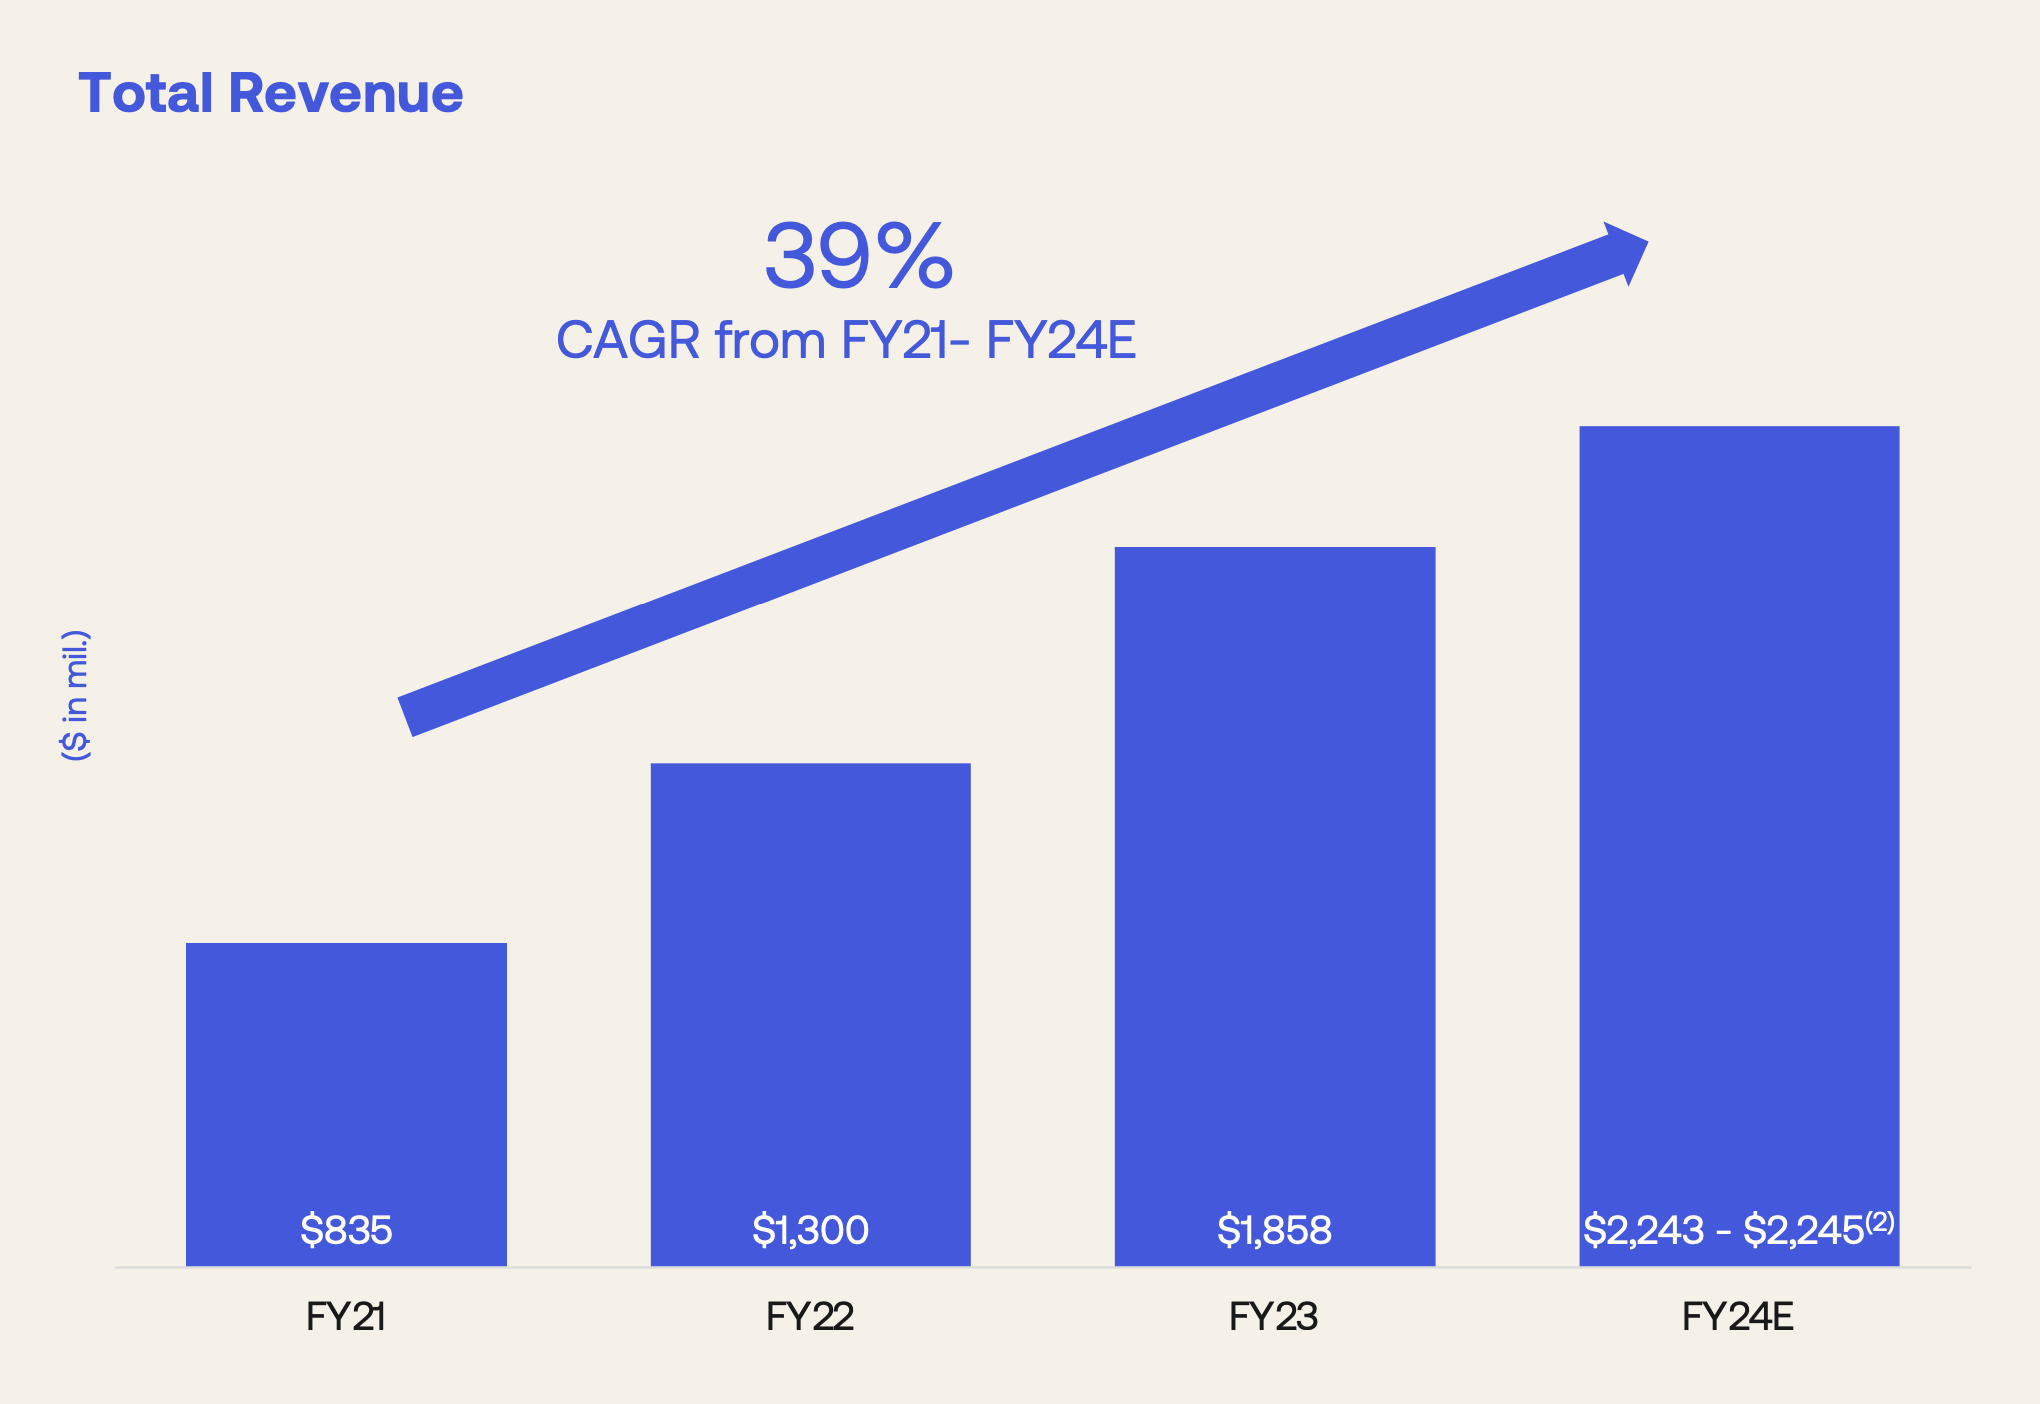 Increasing trend of Okta's revenue growth and growth rate